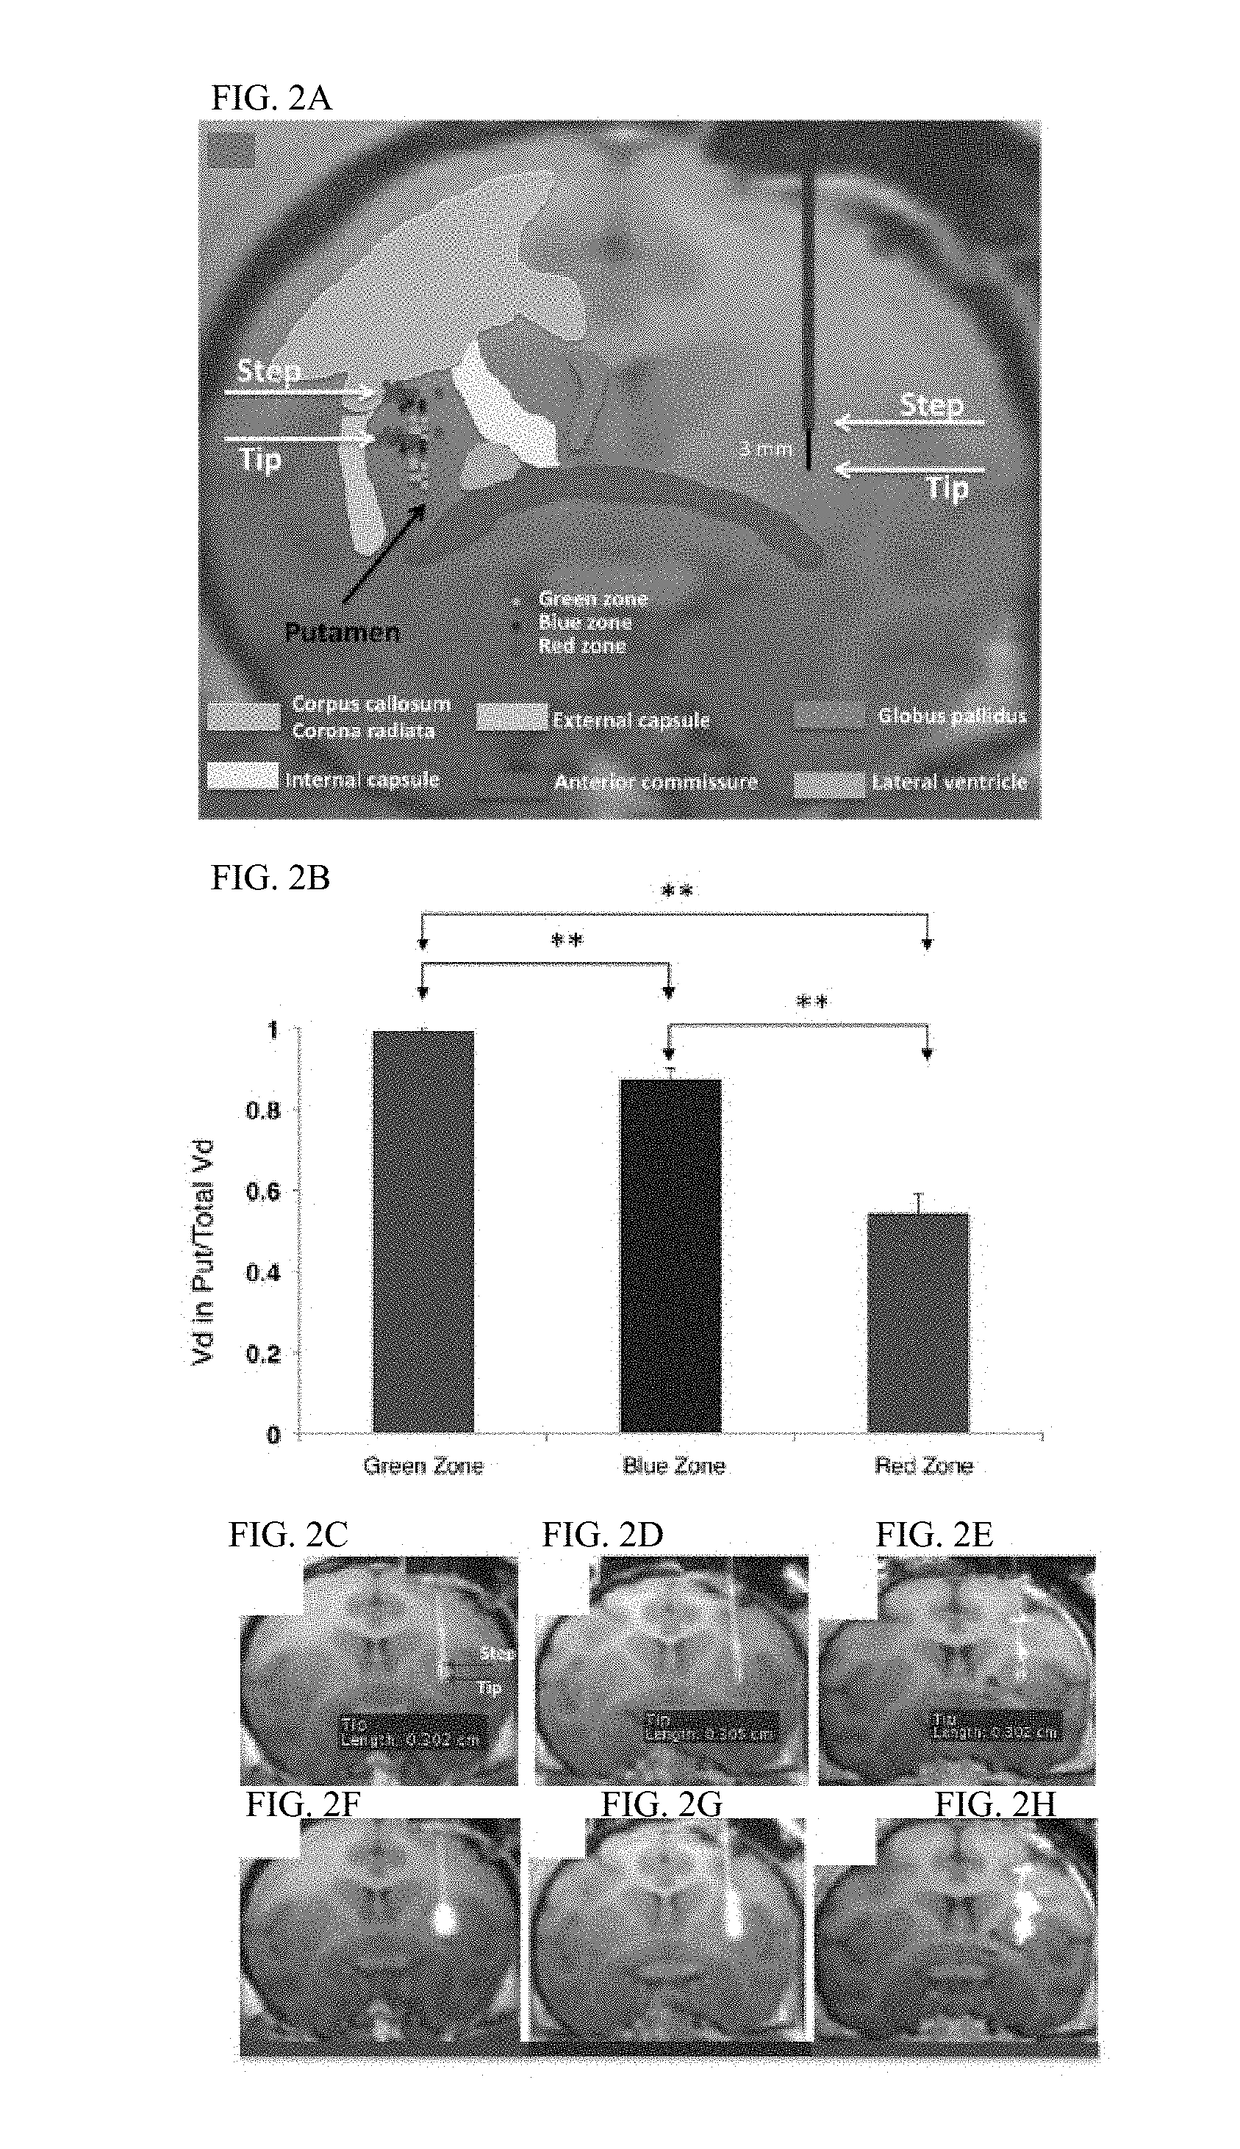 Optimized placement of cannula for delivery of therapeutics to the brain